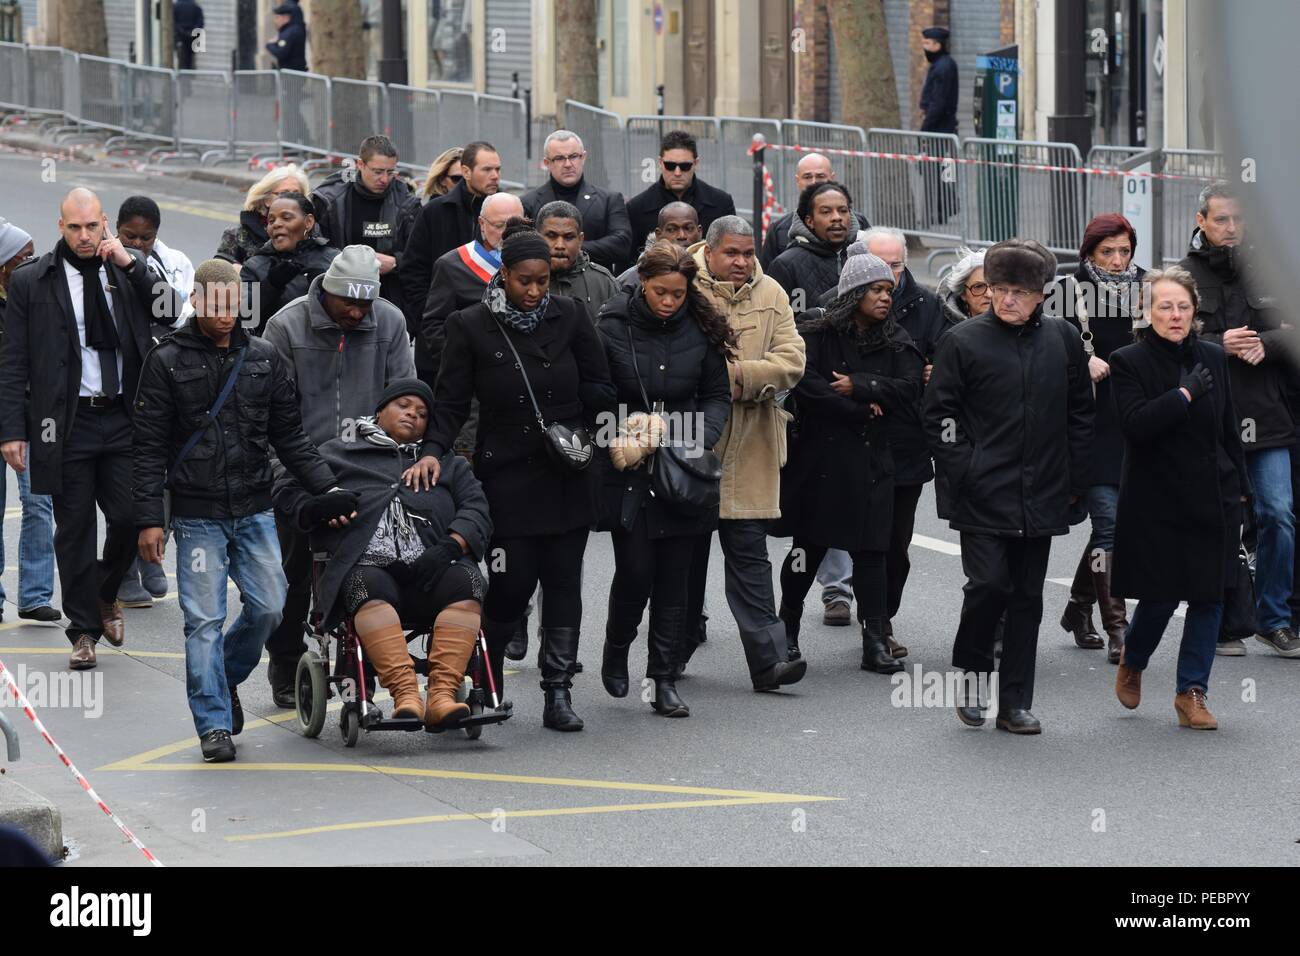 January 11, 2015 - Paris, France:  Family members and close friends of the police officers killed in the recent Paris terrorist attack arrive for a mass unity rally. Four million people demonstrated across the country in a 'Marche Republicaine' (Republican March) celebrating the nation's unity in face of terrorist threats. Thousands of people had banners or cartoons referring to Charlie Hebdo, the satirical magazine whose office was targeted by Islamist gunmen earlier in the week. La grande marche republicaine en hommage aux victimes de l'attentat contre Charlie Hebdo a rassemble pres de 2 mil Stock Photo